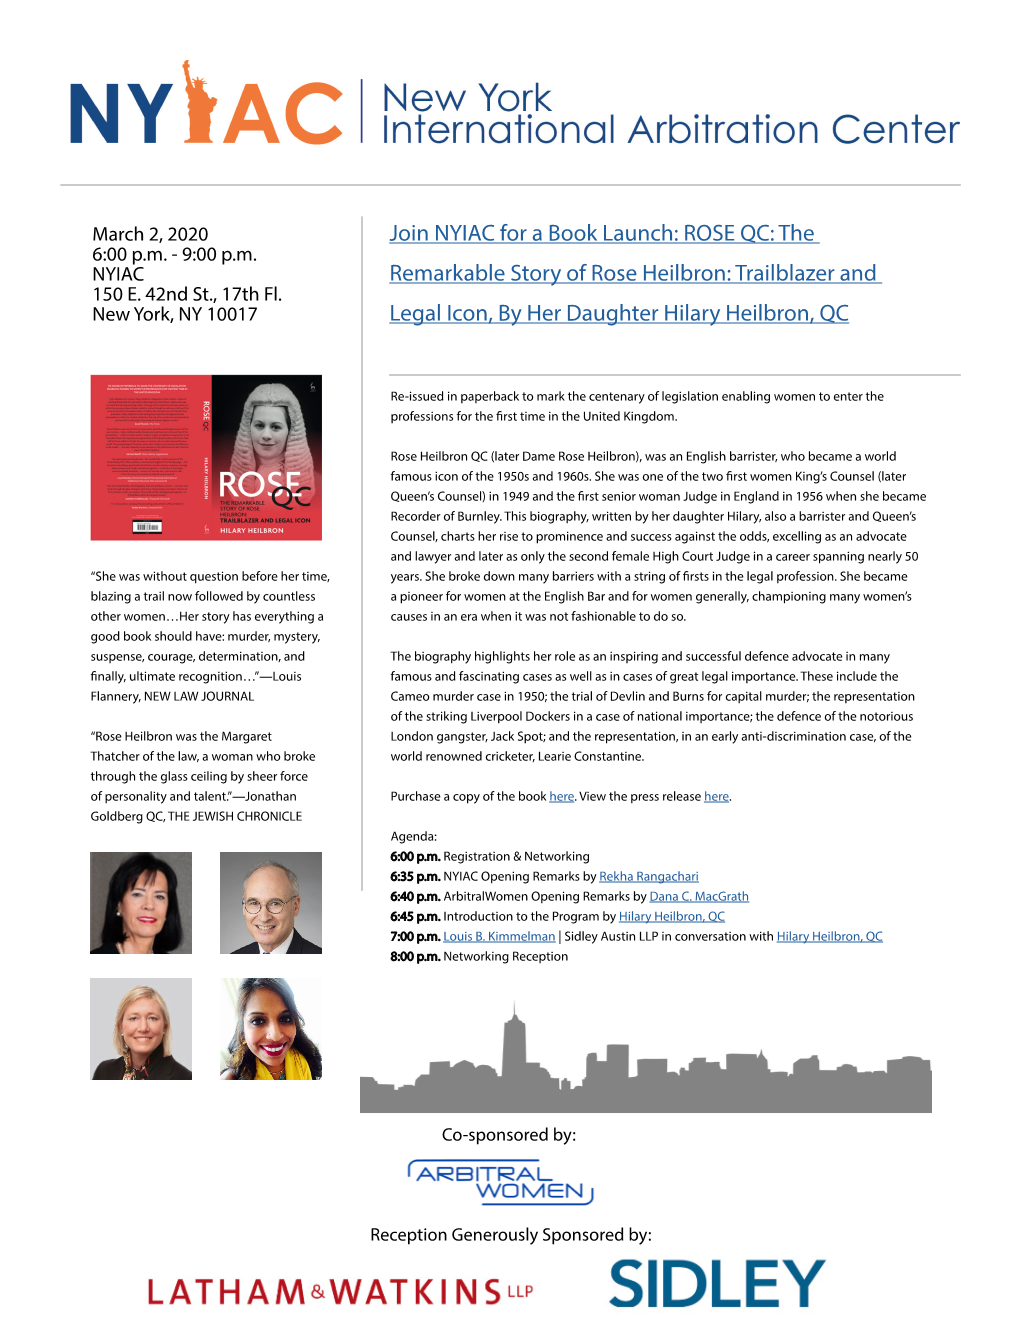 Join NYIAC for a Book Launch: ROSE QC: the Remarkable Story of Rose